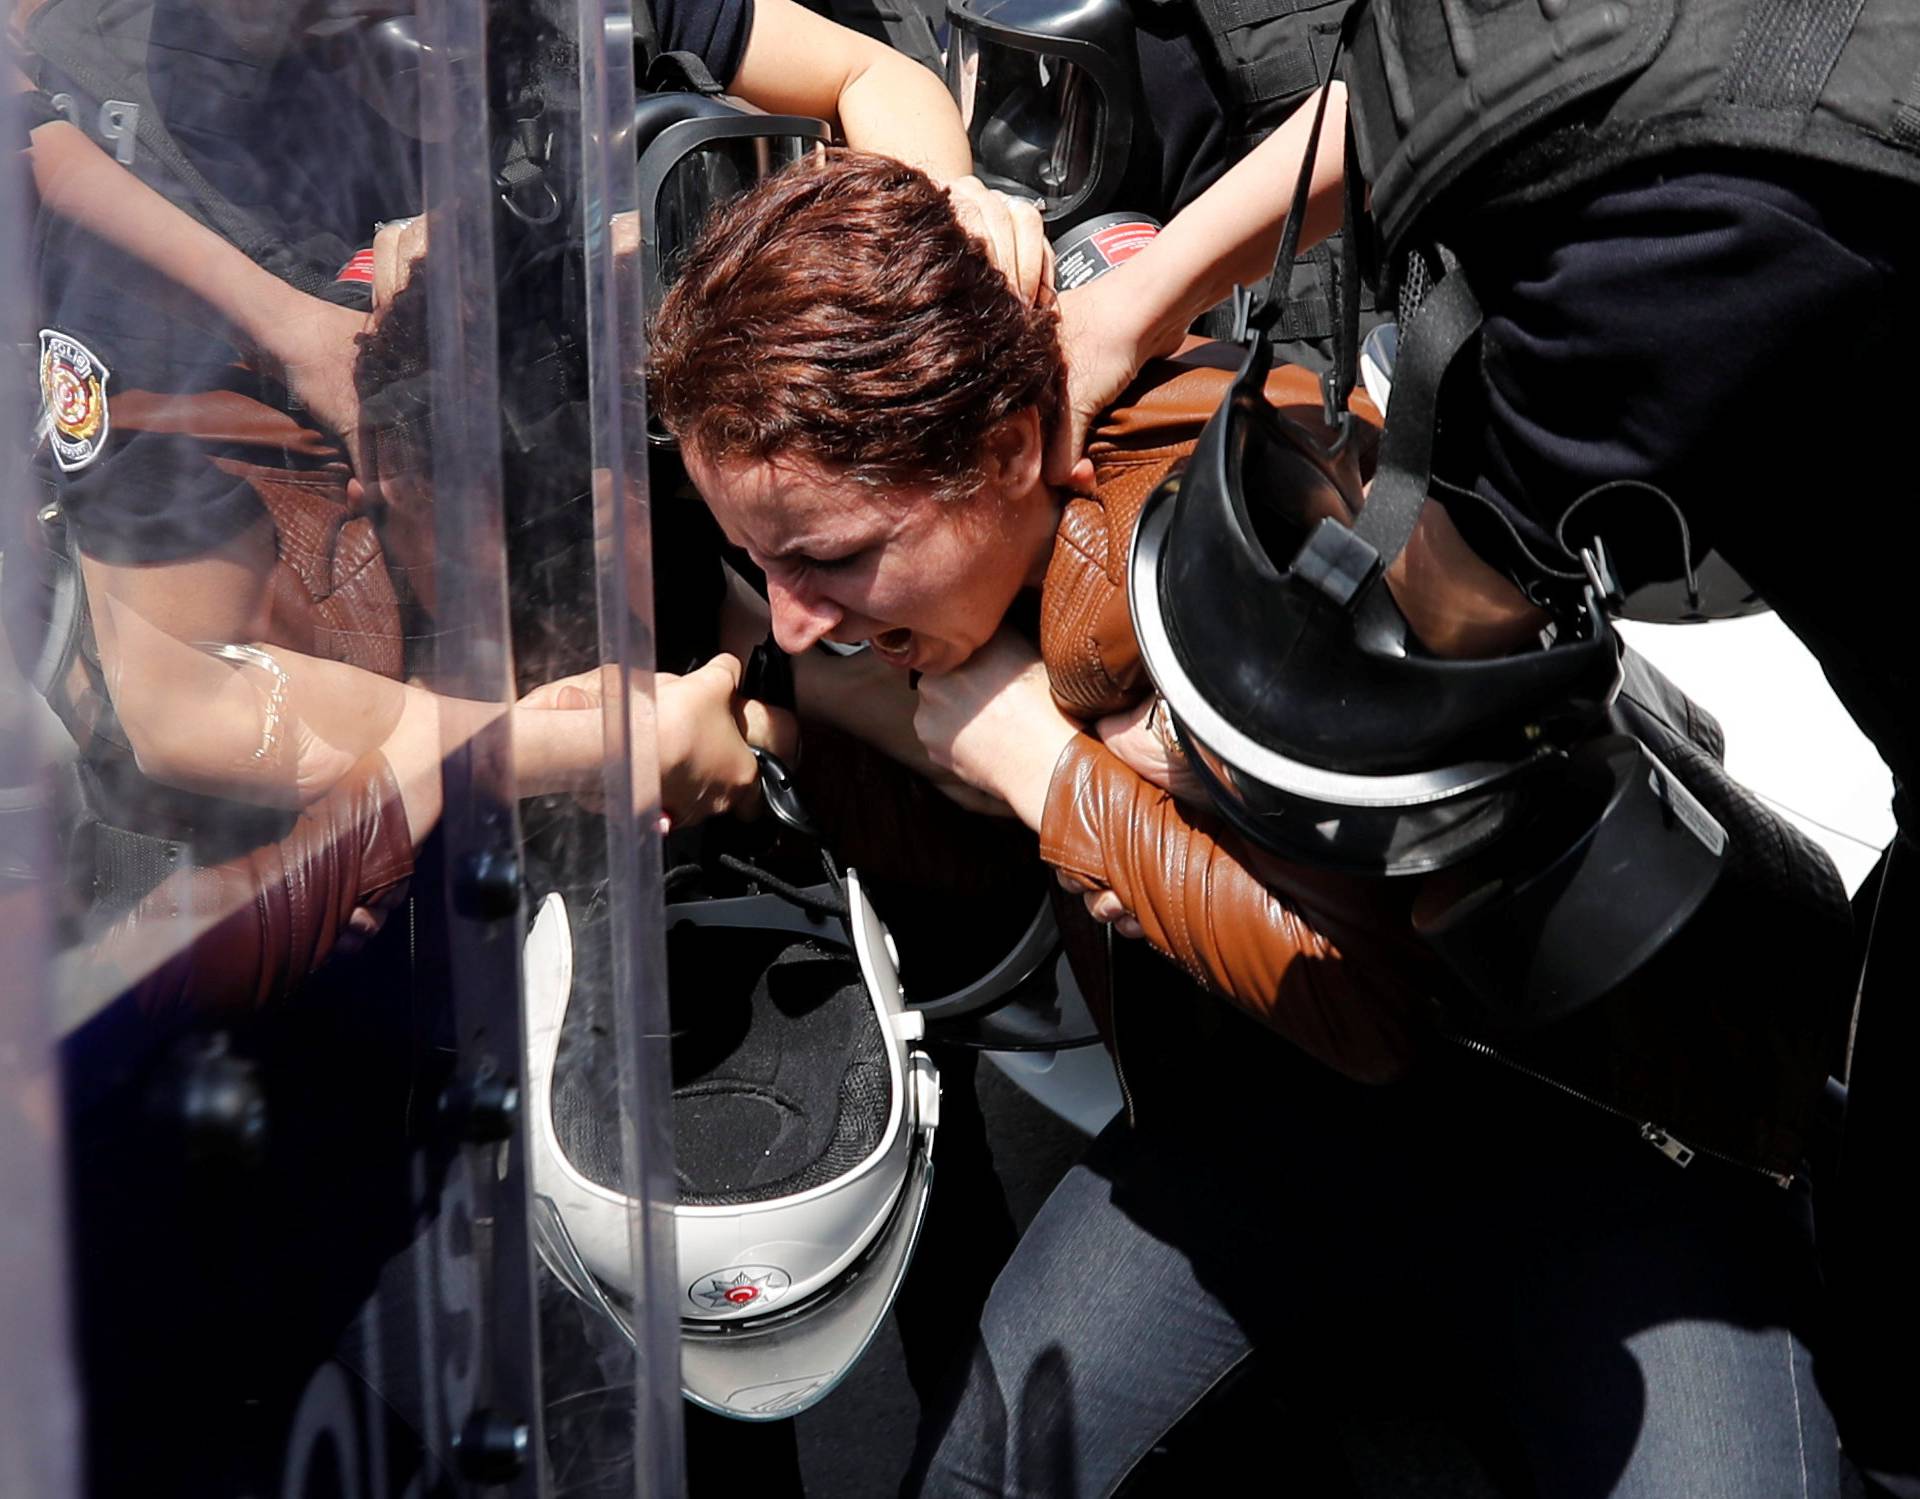 Turkish riot police detain a protester as she and others attempted to defy a ban and march on Taksim Square to celebrate May Day in Istanbul